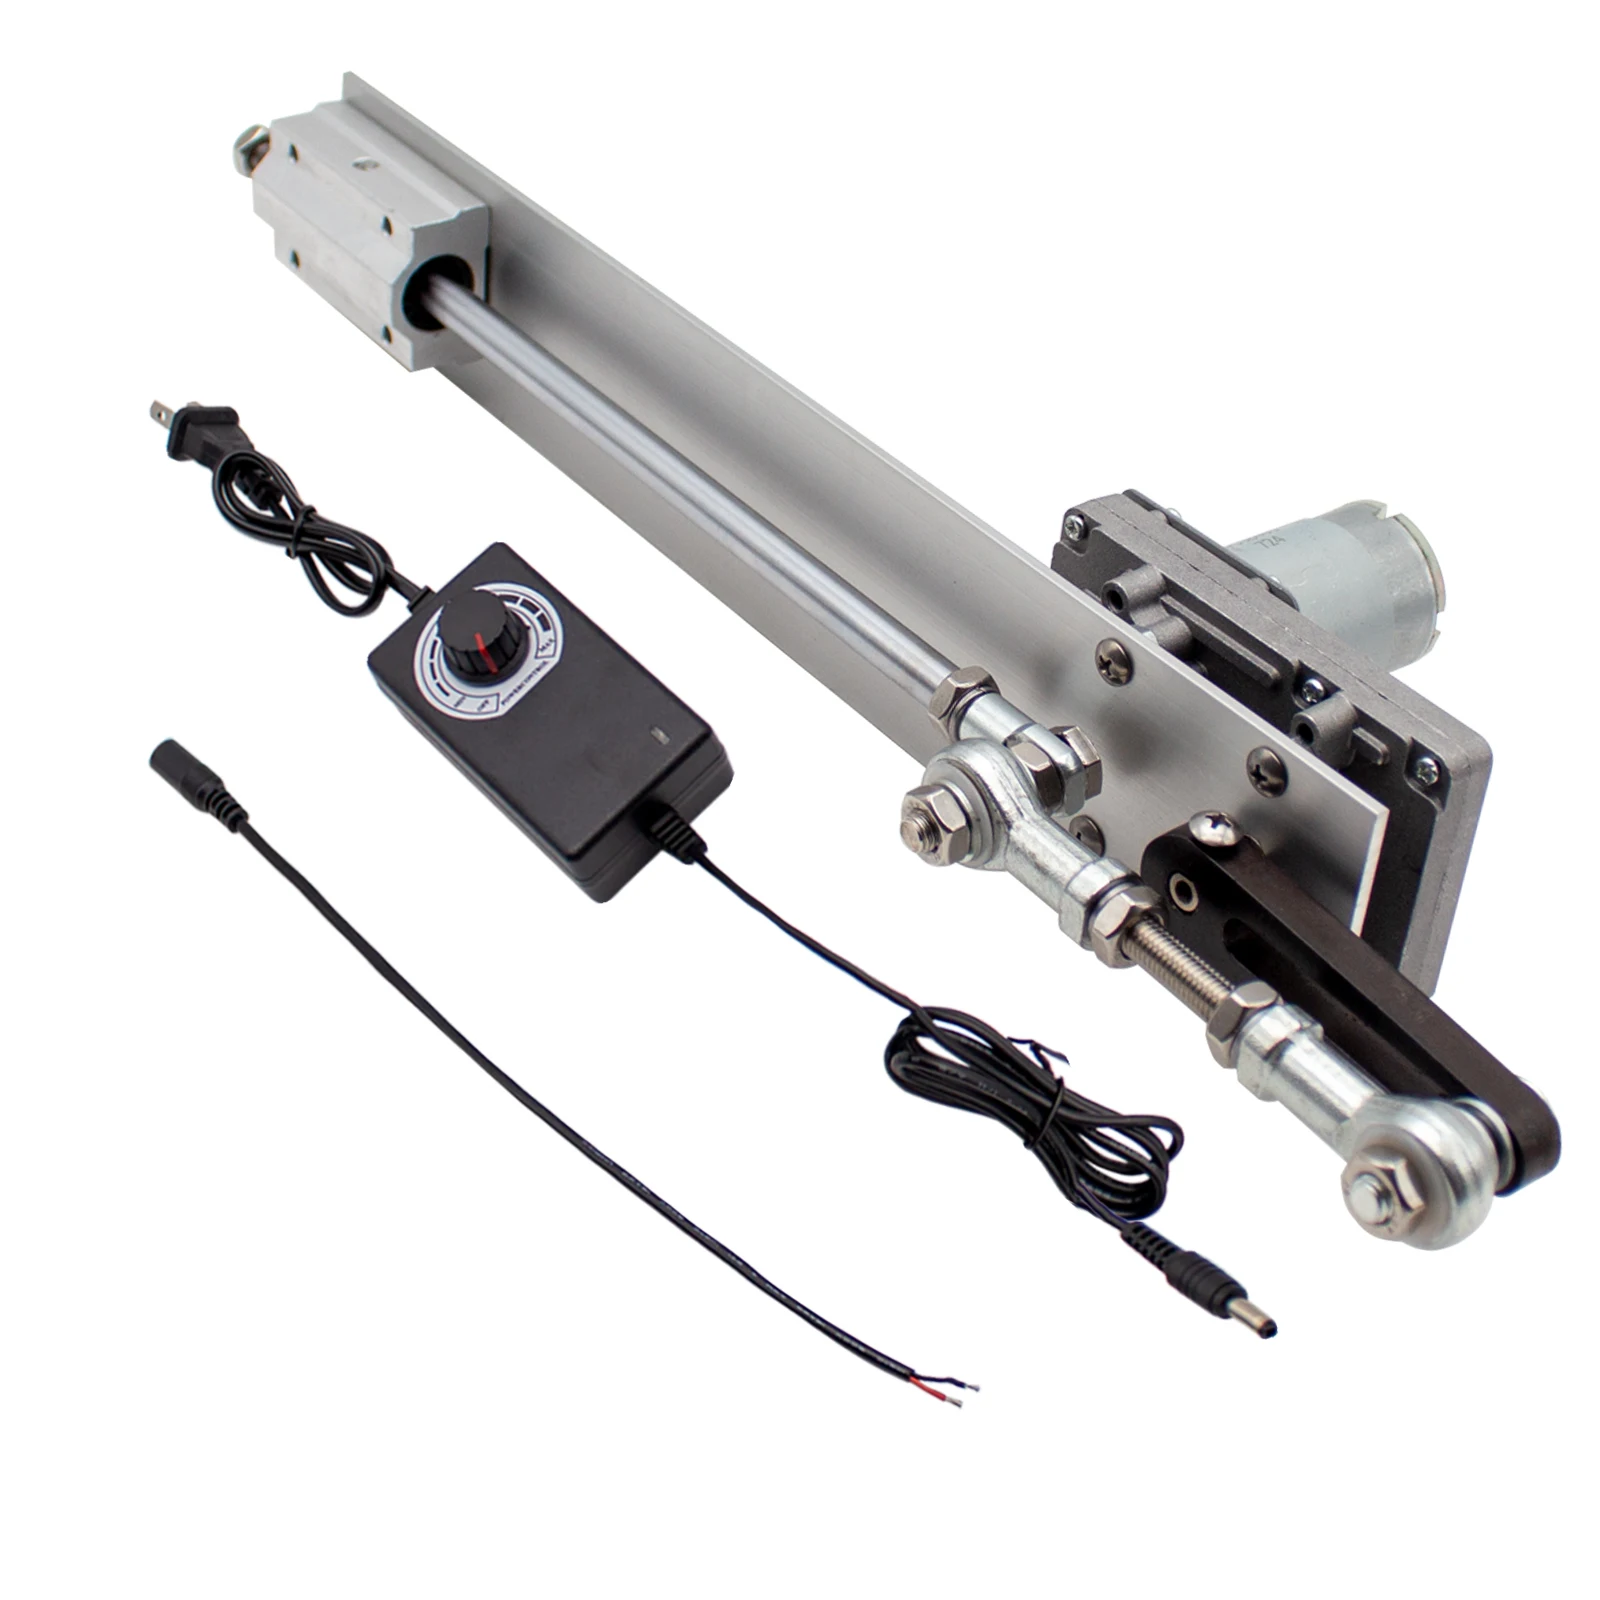 Reciprocating Cycle Linear Actuator DC 24V Gear Adjustable Telescopic Motor DIY Motor With Speed Controller Stroke 3-15CM